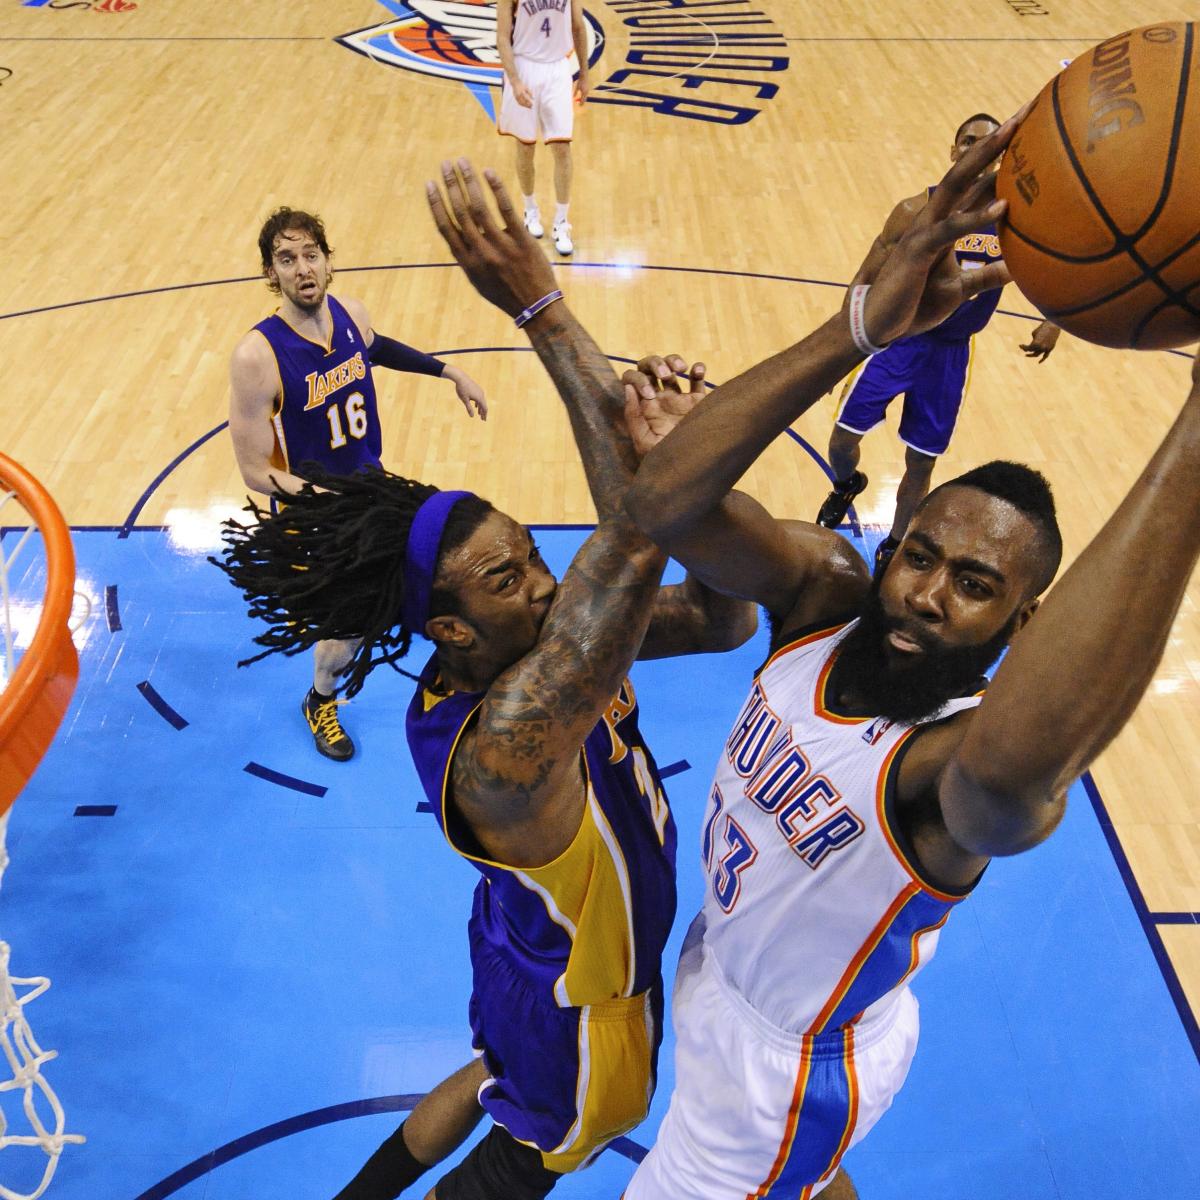 L A Lakers Vs Oklahoma City Thunder Game 2 Live Score Analysis And Reaction Bleacher Report Latest News Videos And Highlights